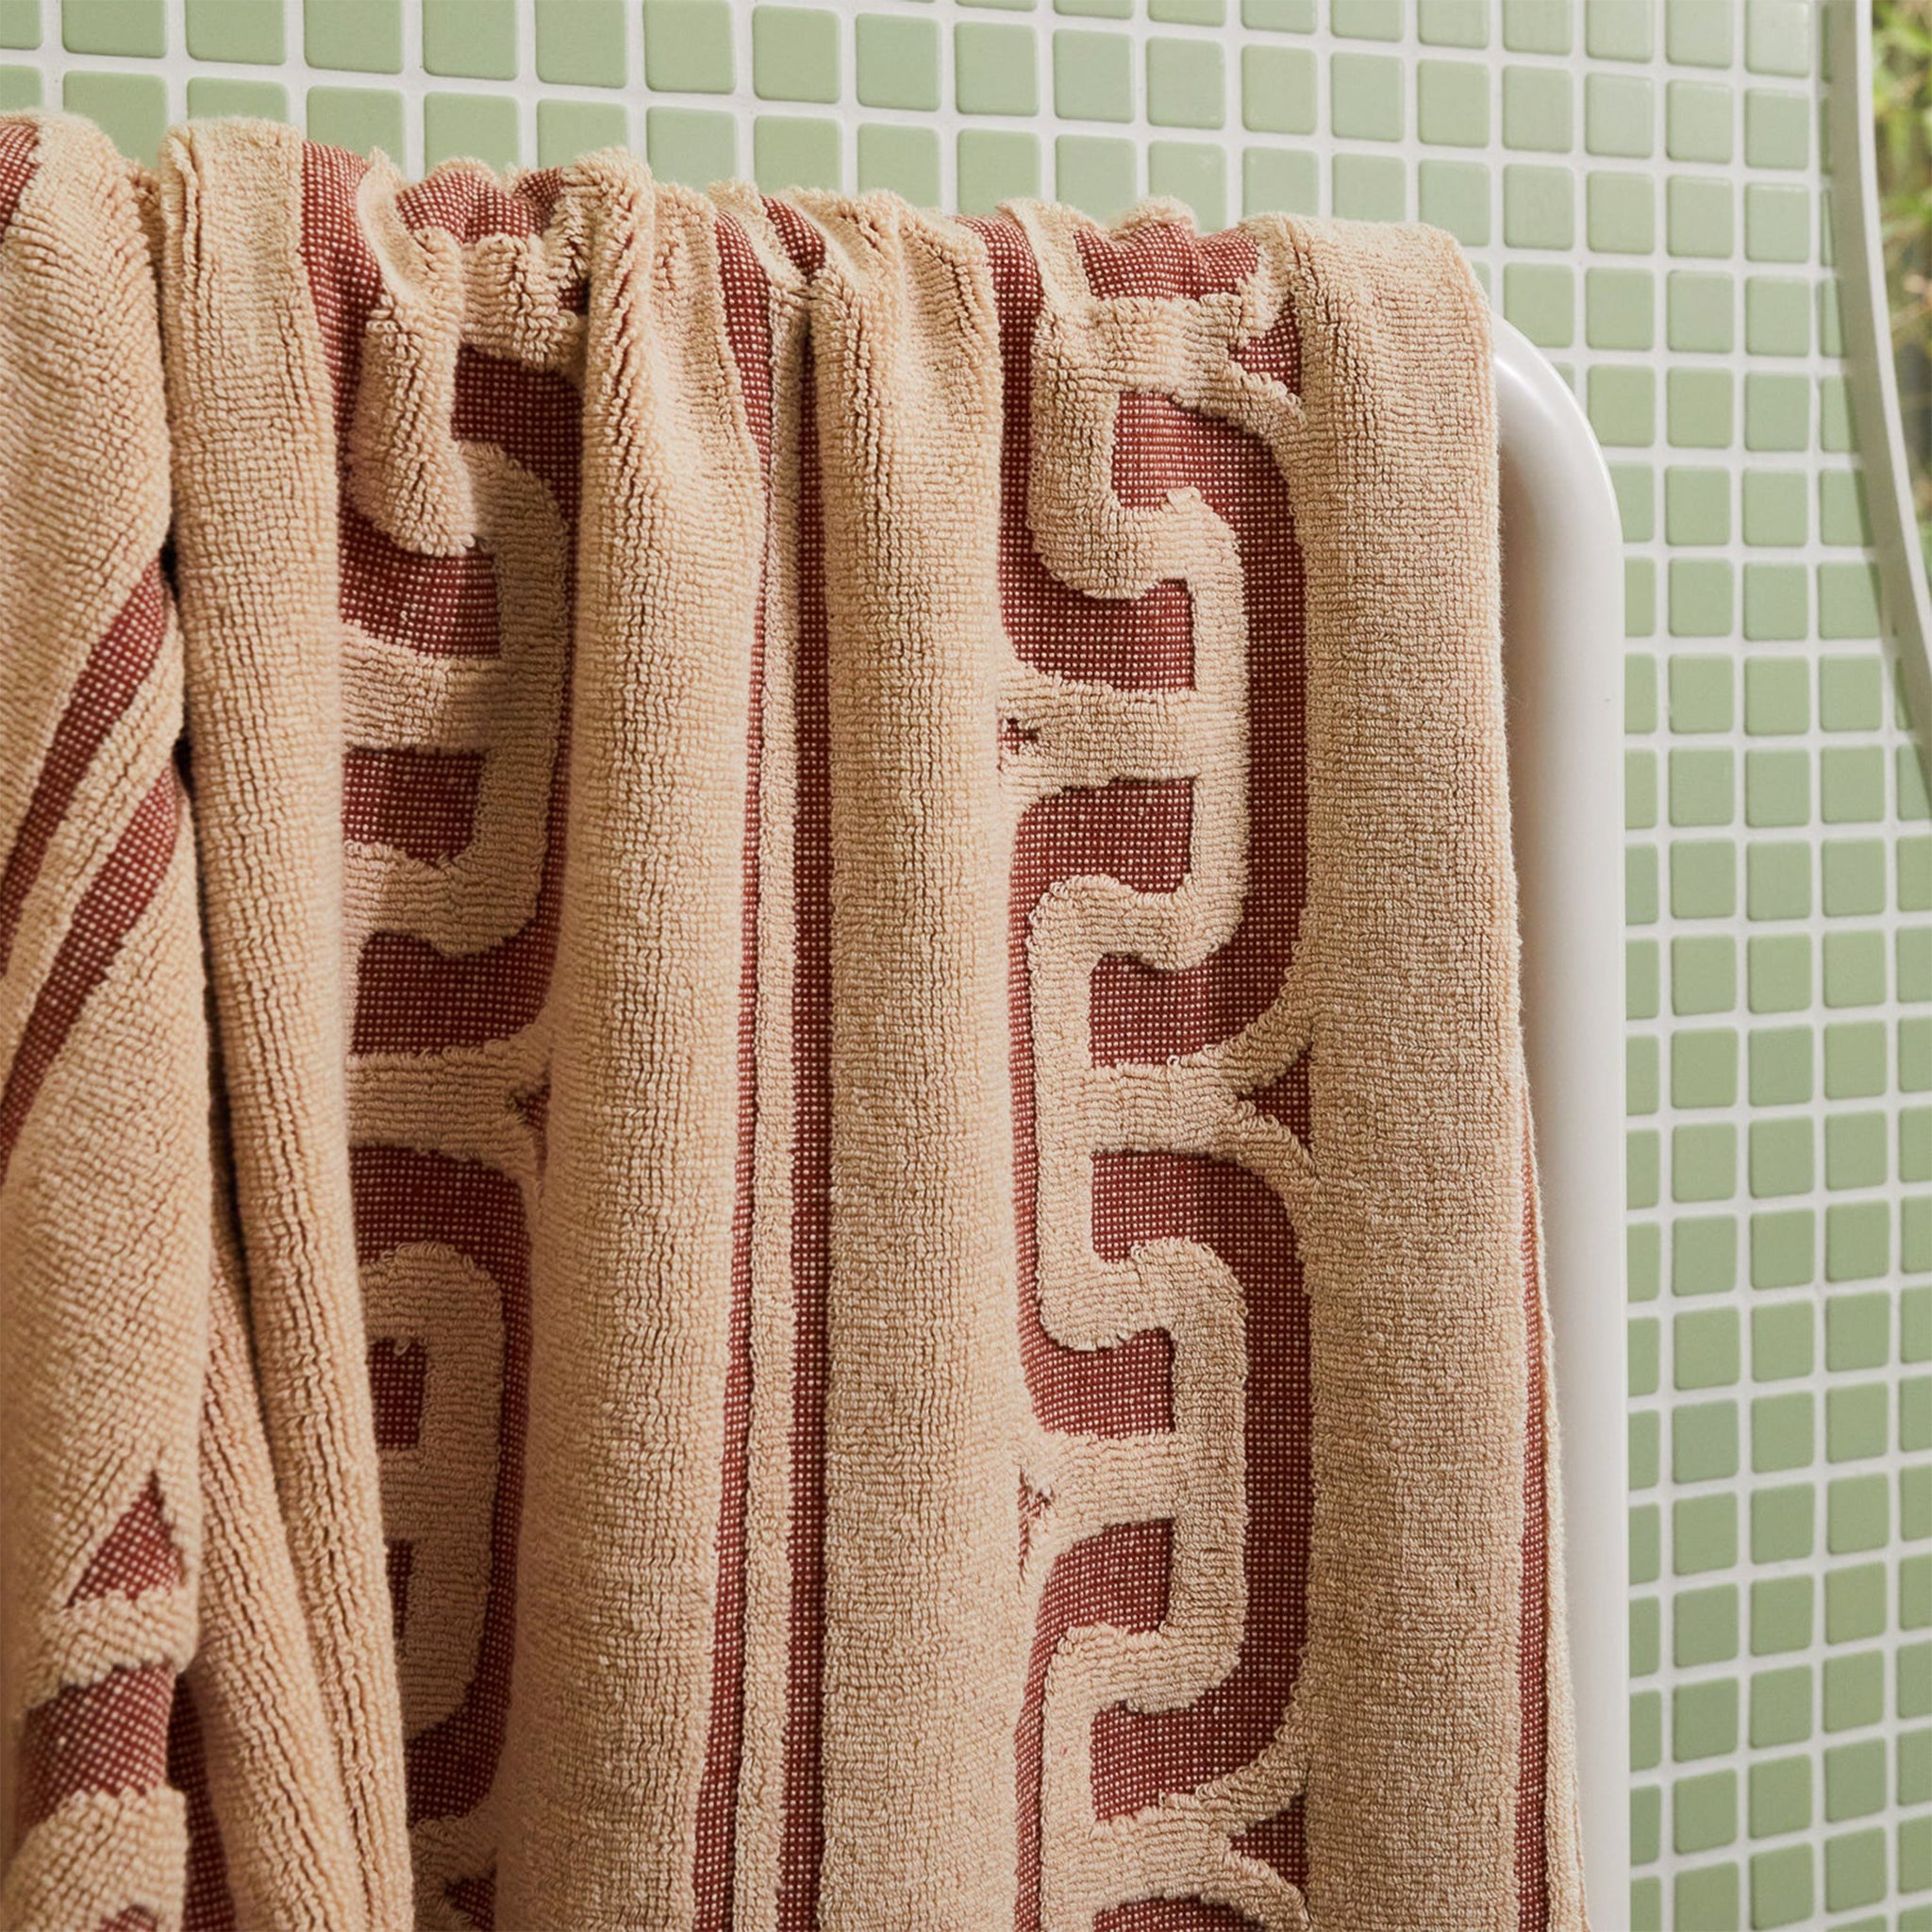 A brown and dark brown bath towel with a wavy design and fringe edge. 